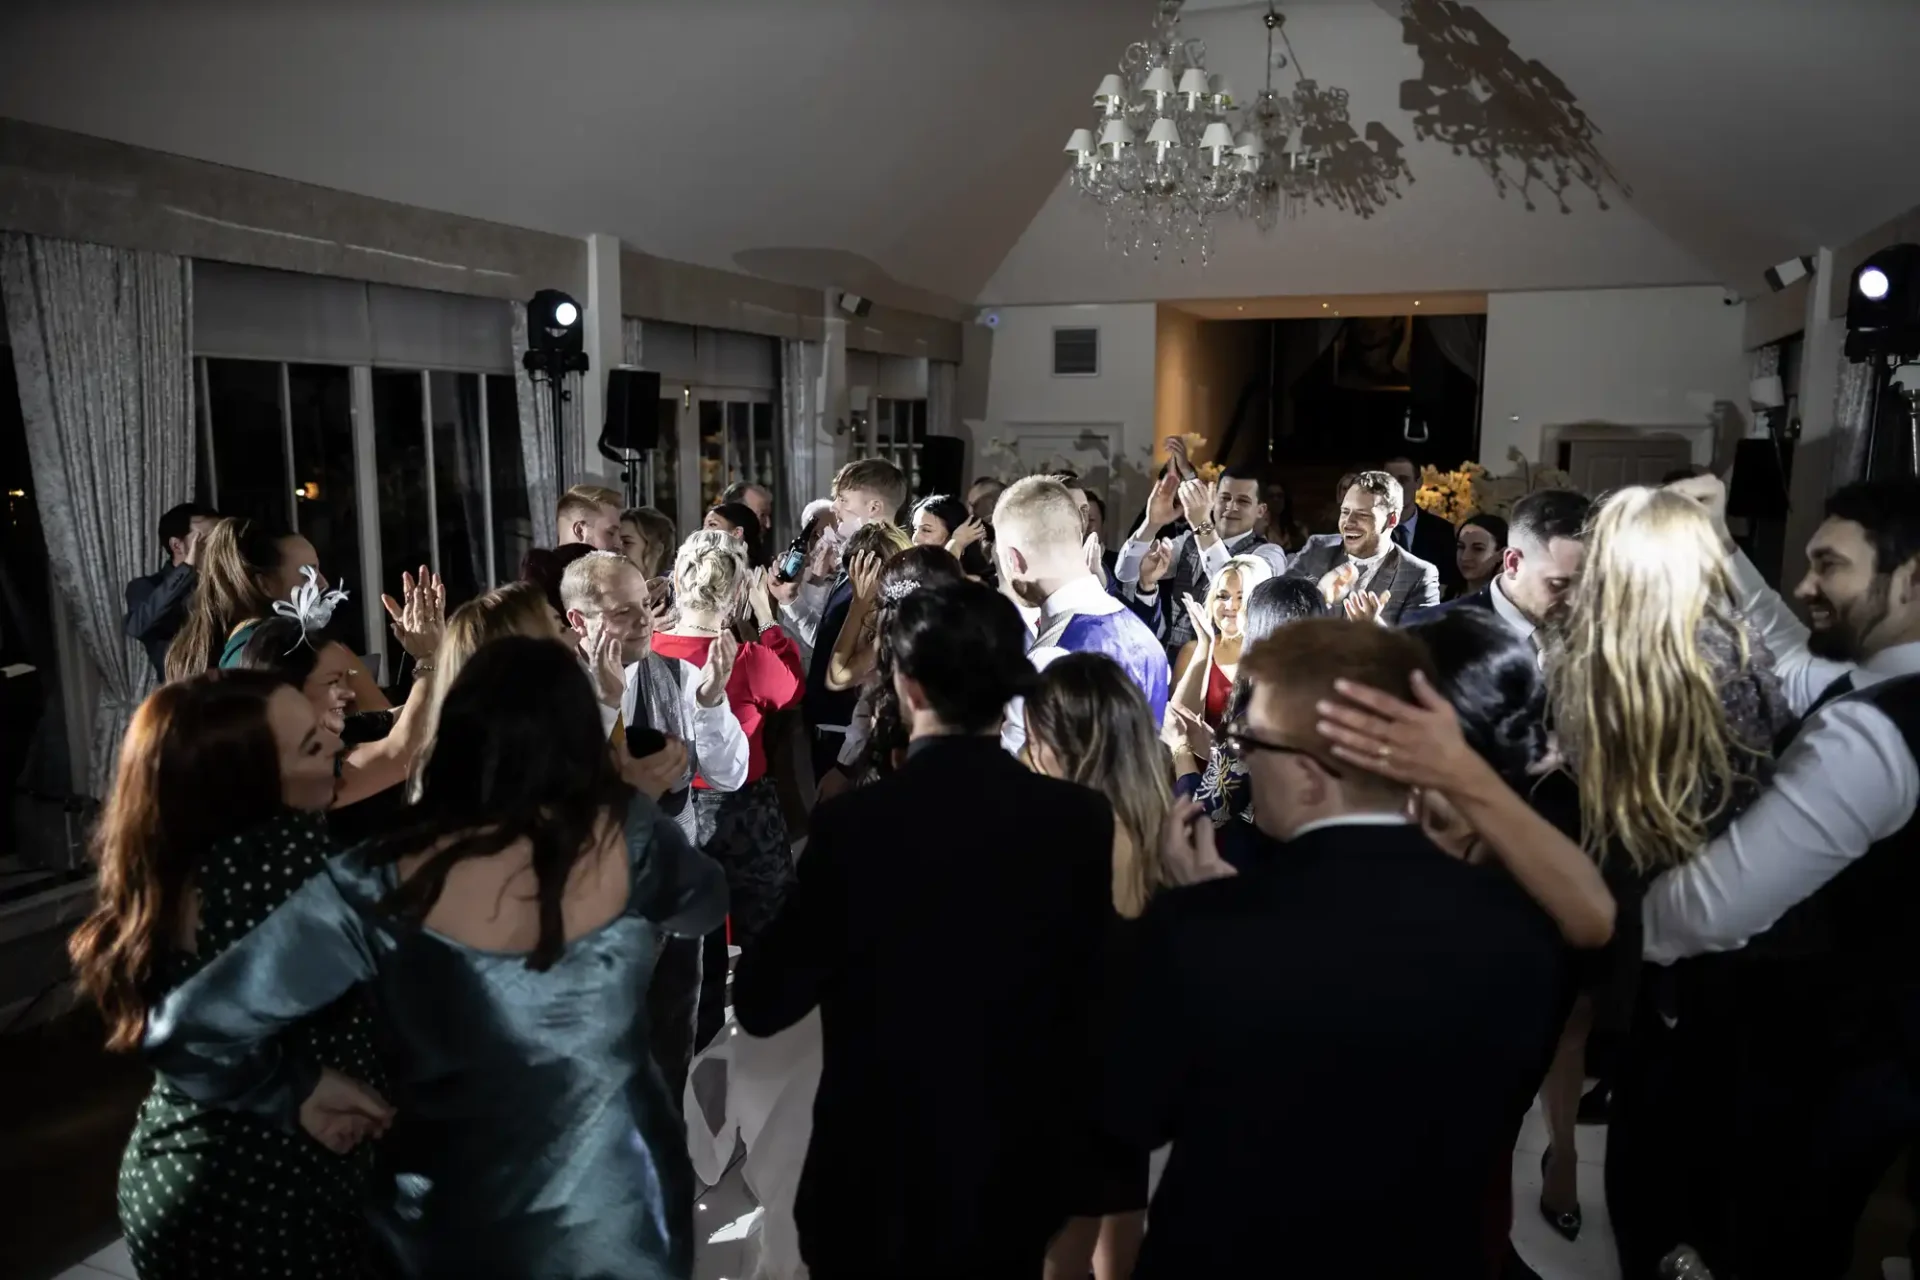 Guests dancing enthusiastically at a lively indoor evening reception, with a chandelier overhead and dj equipment visible.